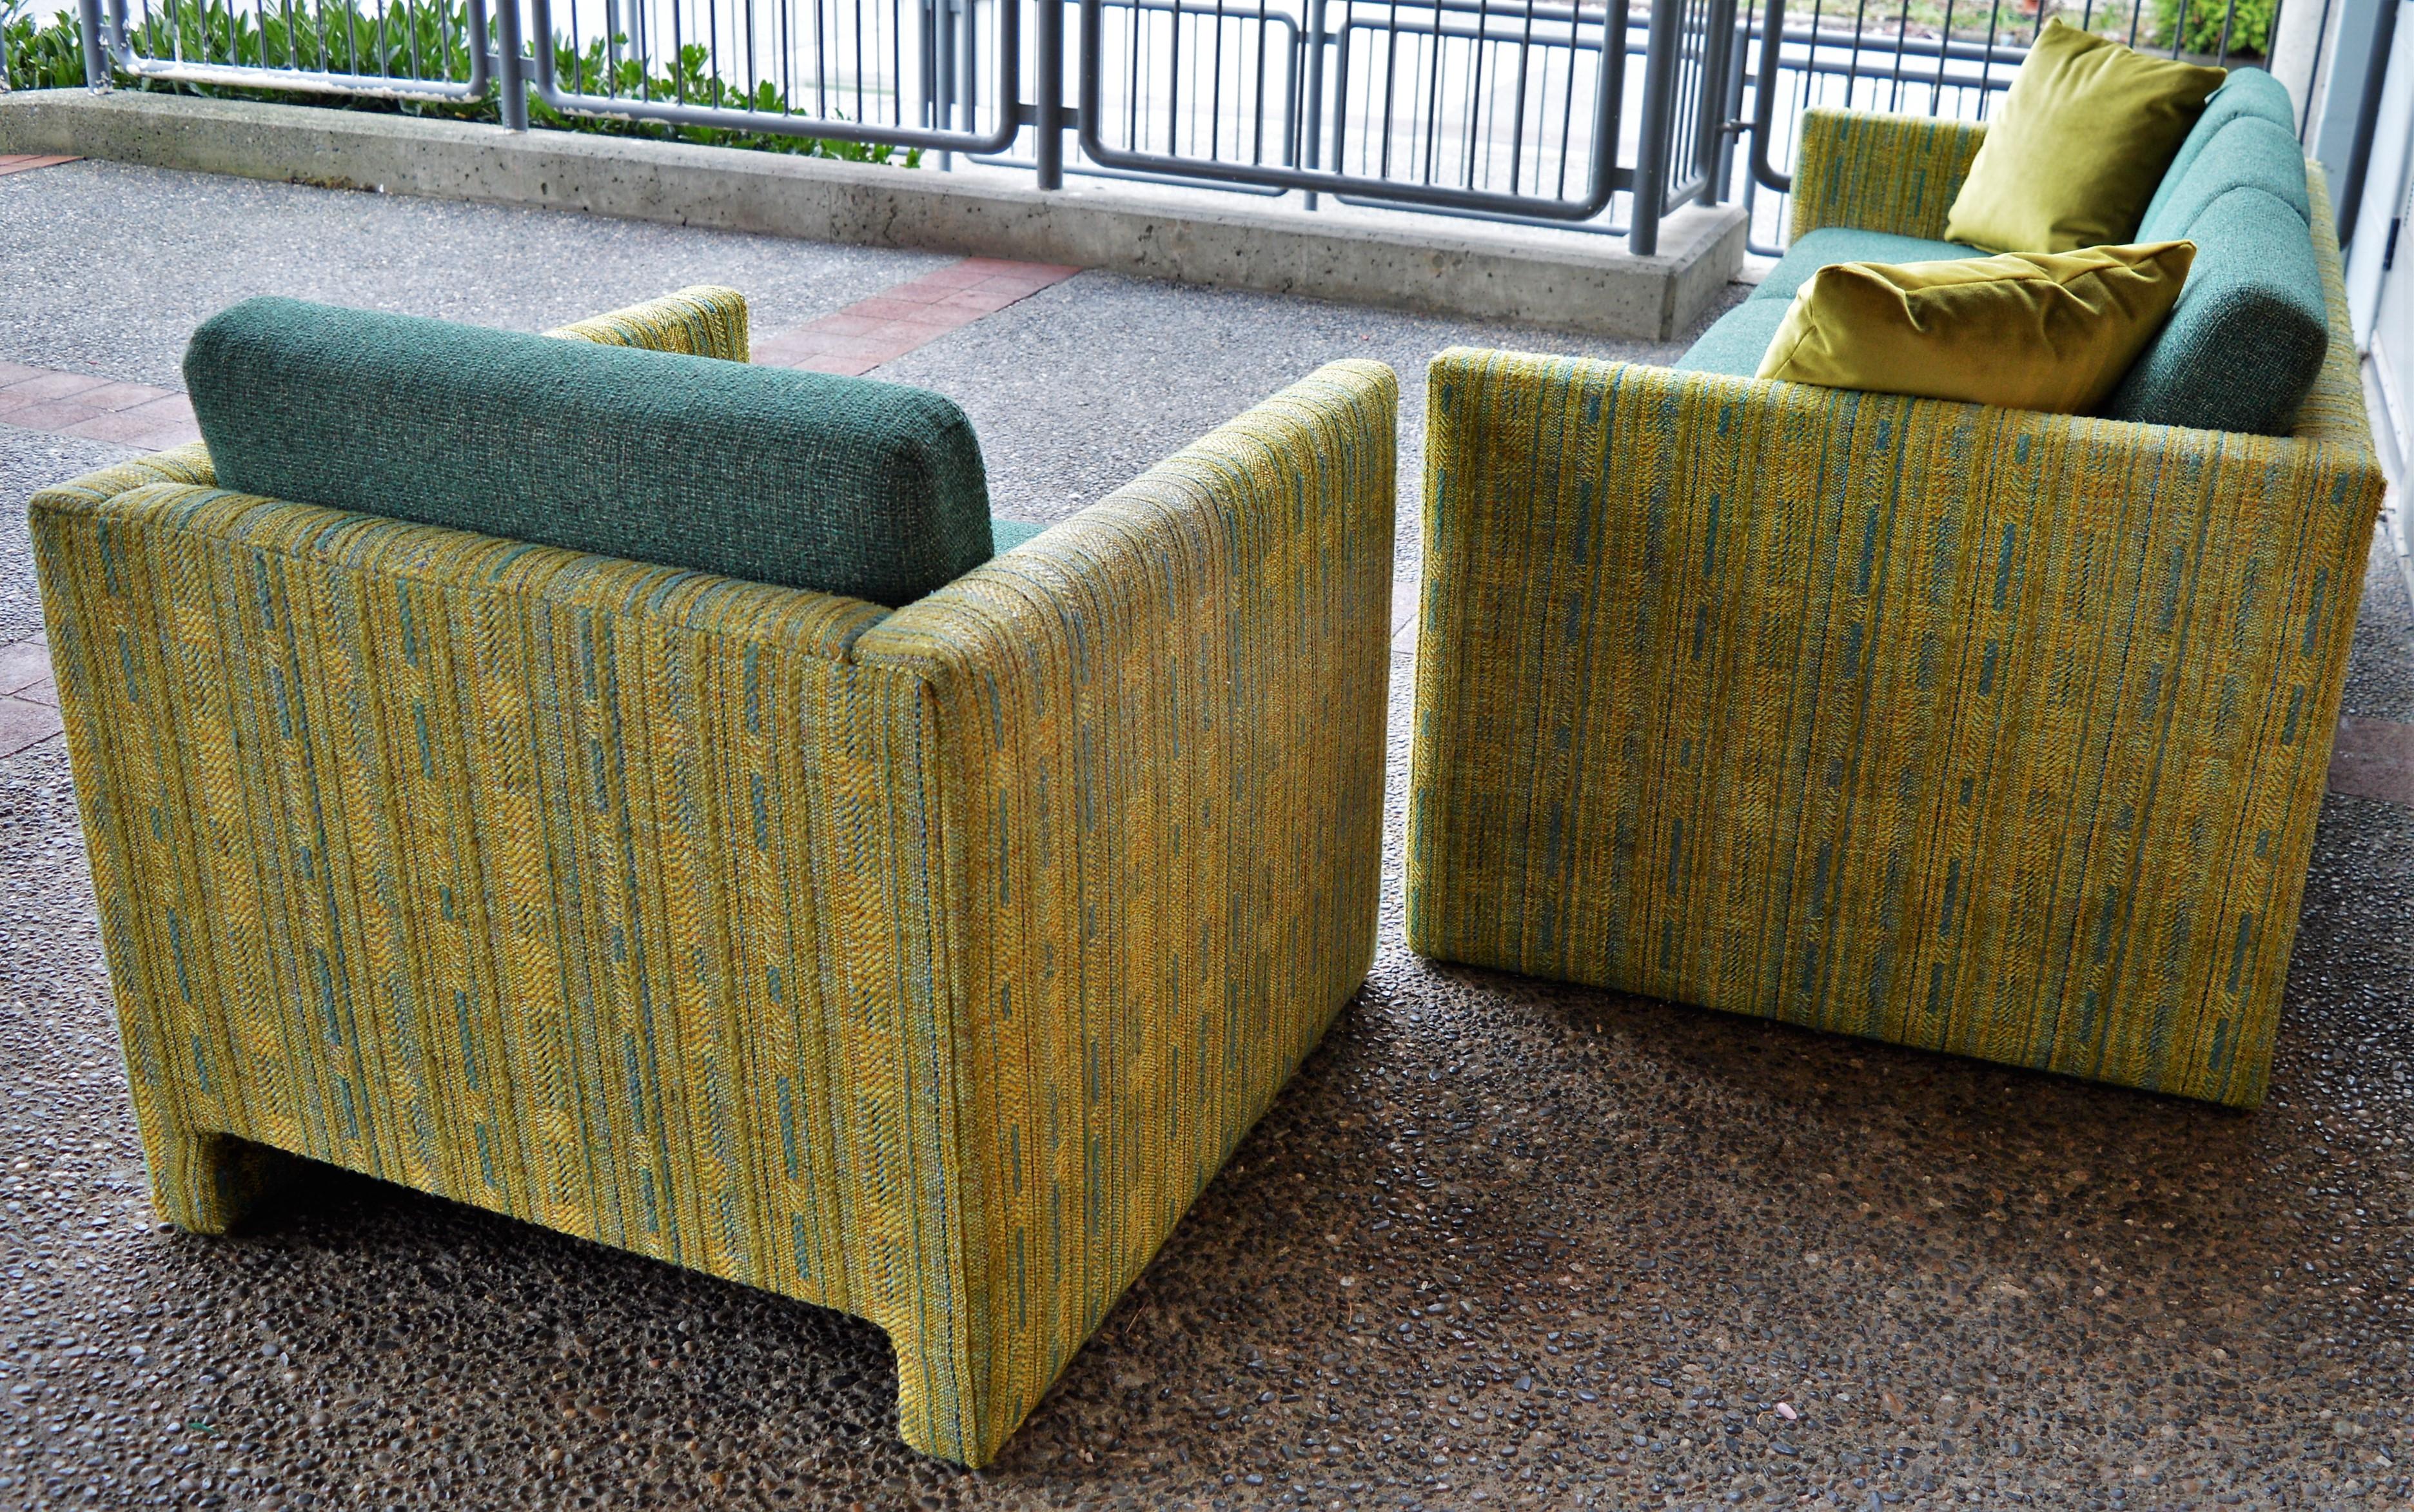 Amazing Mid-Century Modern green/teal high quality sofa and club chair in outstanding original condition. Featuring seat cushions with all new foam in a gorgeous teal wool, contrasting with the green/teal patterned cubic surround. Superbly